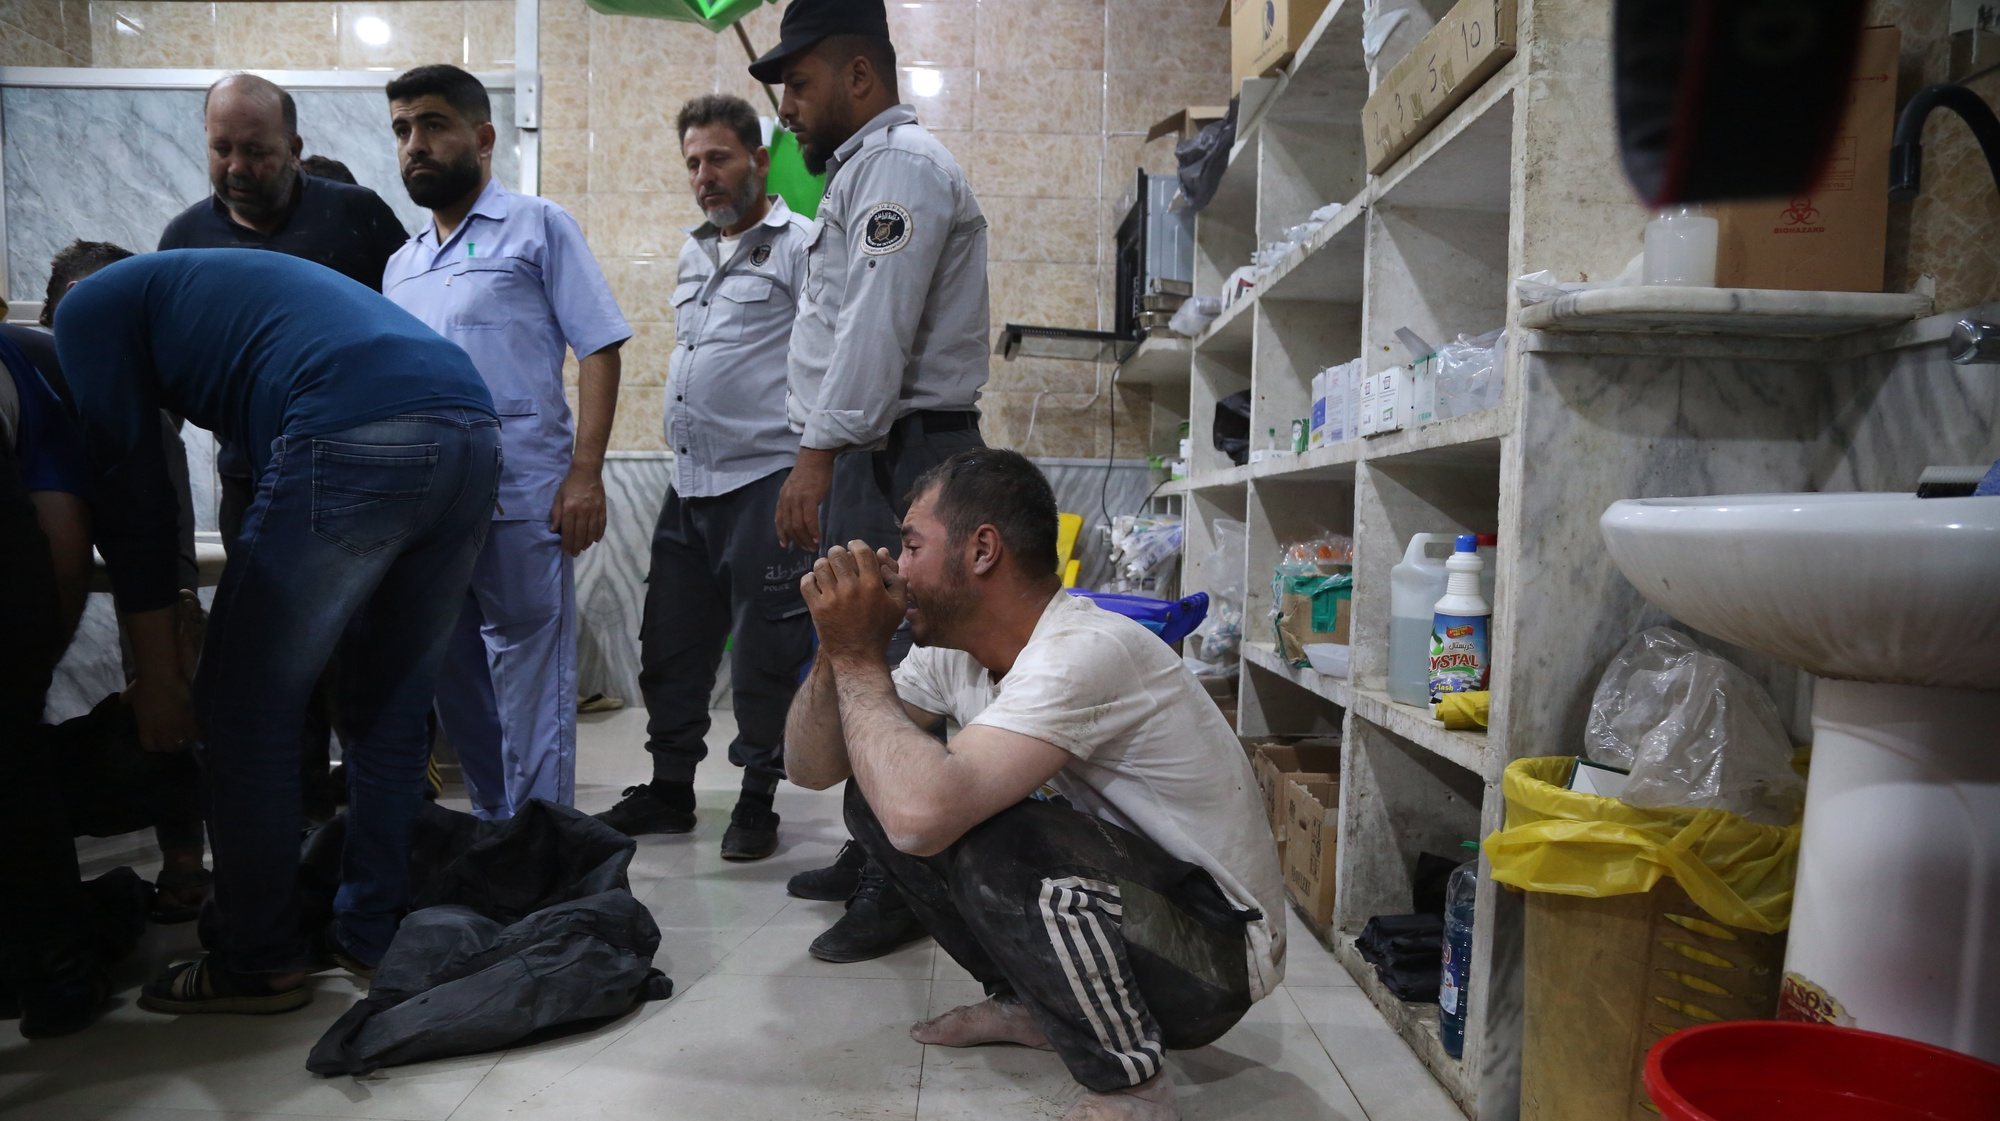 epa10903684 A man cries as medics attend to a victim at Kenana Hospital following an attack on Darat Izza city in north-western Aleppo, Syria, 05 October 2023 (issued 06 October 2023). According to the UK-based Syrian Observatory for Human Rights (SOHR), at least 13 people were killed in attacks reportedly carried by Syrian forces targeting Idlib and Aleppo. Four people were killed and seven others injured in heavy artillery fire by regime forces targeting positions in Darat Izza city in north-western Aleppo, SOHR said.  EPA/BILAL AL-HAMMOUD